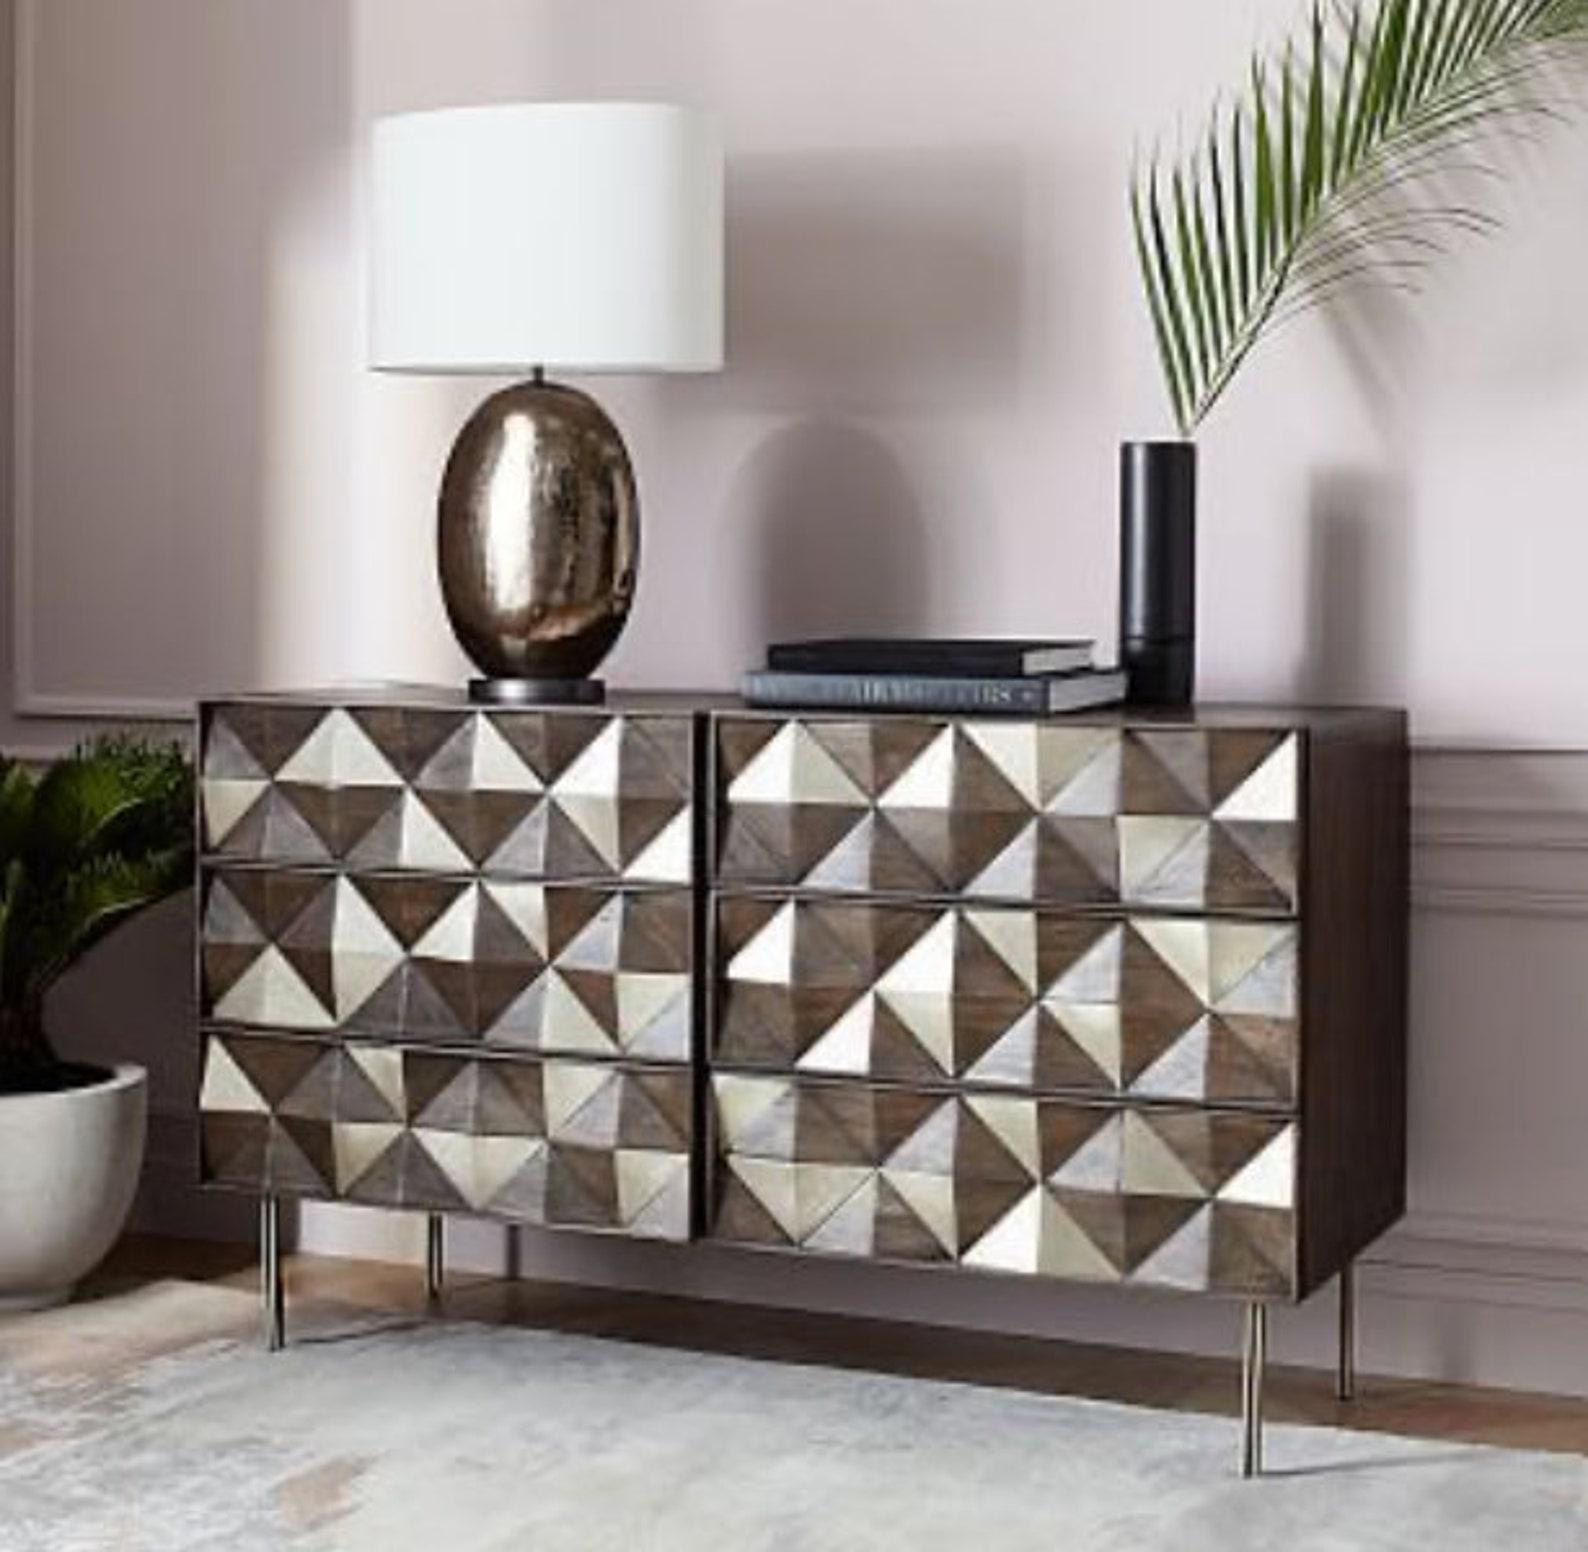 A stunning, sculptural contemporary modern Roar + Rabbit for West Elm Diamond Rhombus 6-drawer chest.

Designed by the creative firm Roar + Rabbit, the Rhombus Dresser is equal parts modern sculpture and handy storage. Its striking drawer fronts